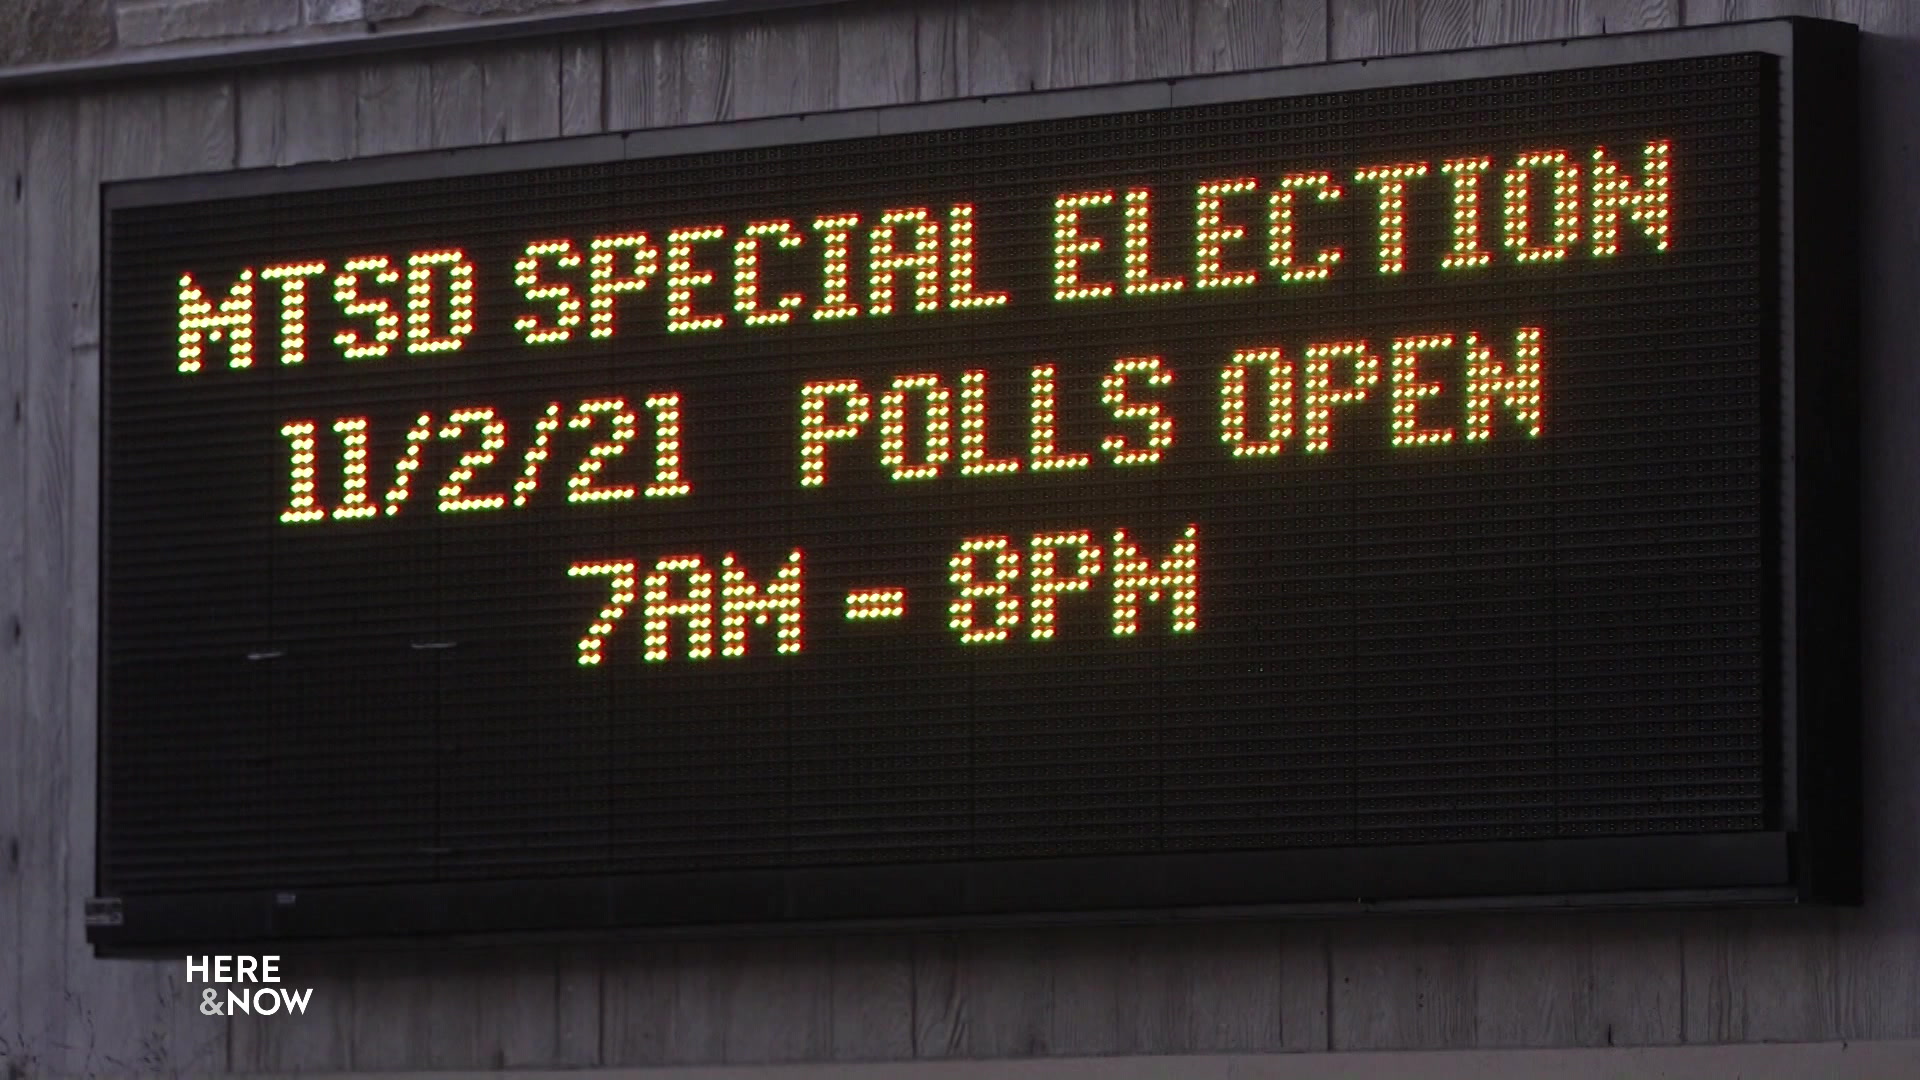 A digital sign reads: "MTSD Special Election, 11/2/21, Polls open 7 AM - 8PM.